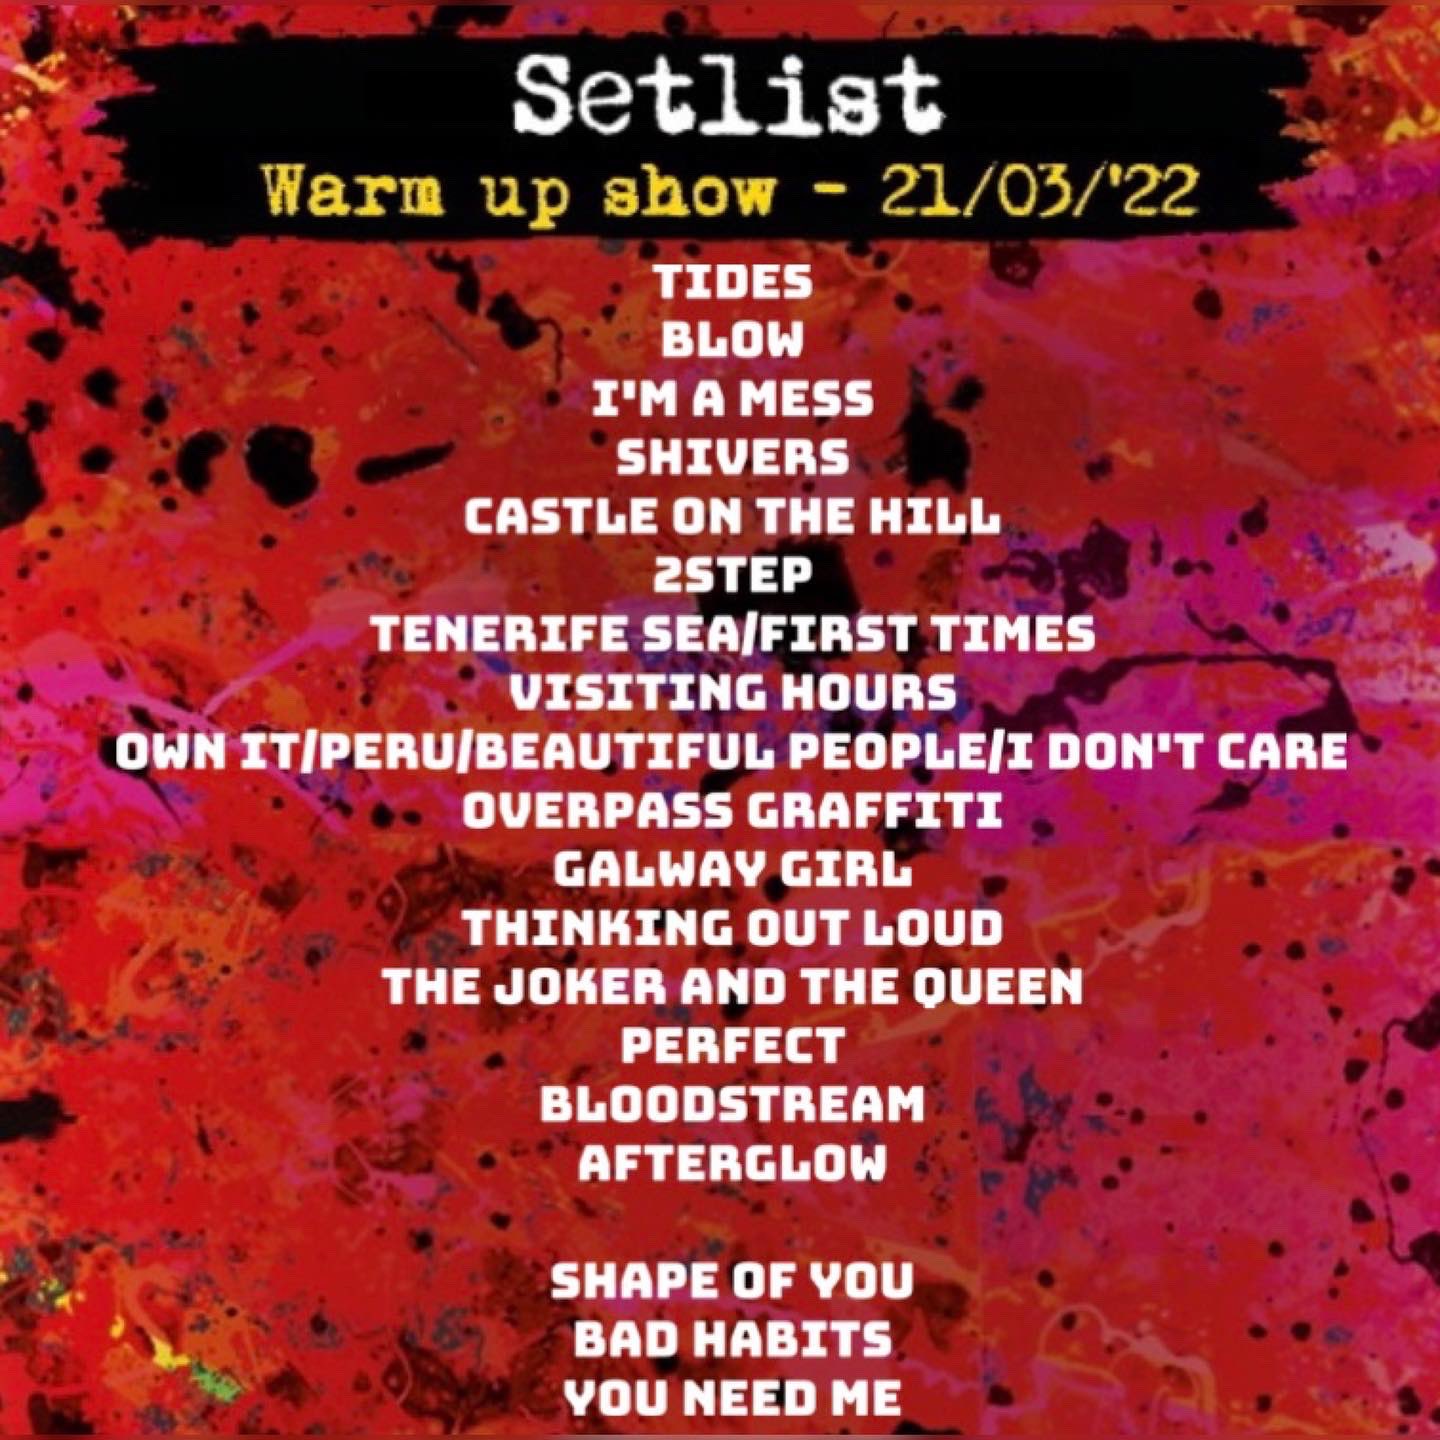 Ed Sheeran News (Fanpage) 🦋 on Twitter "Setlist for the first warm up